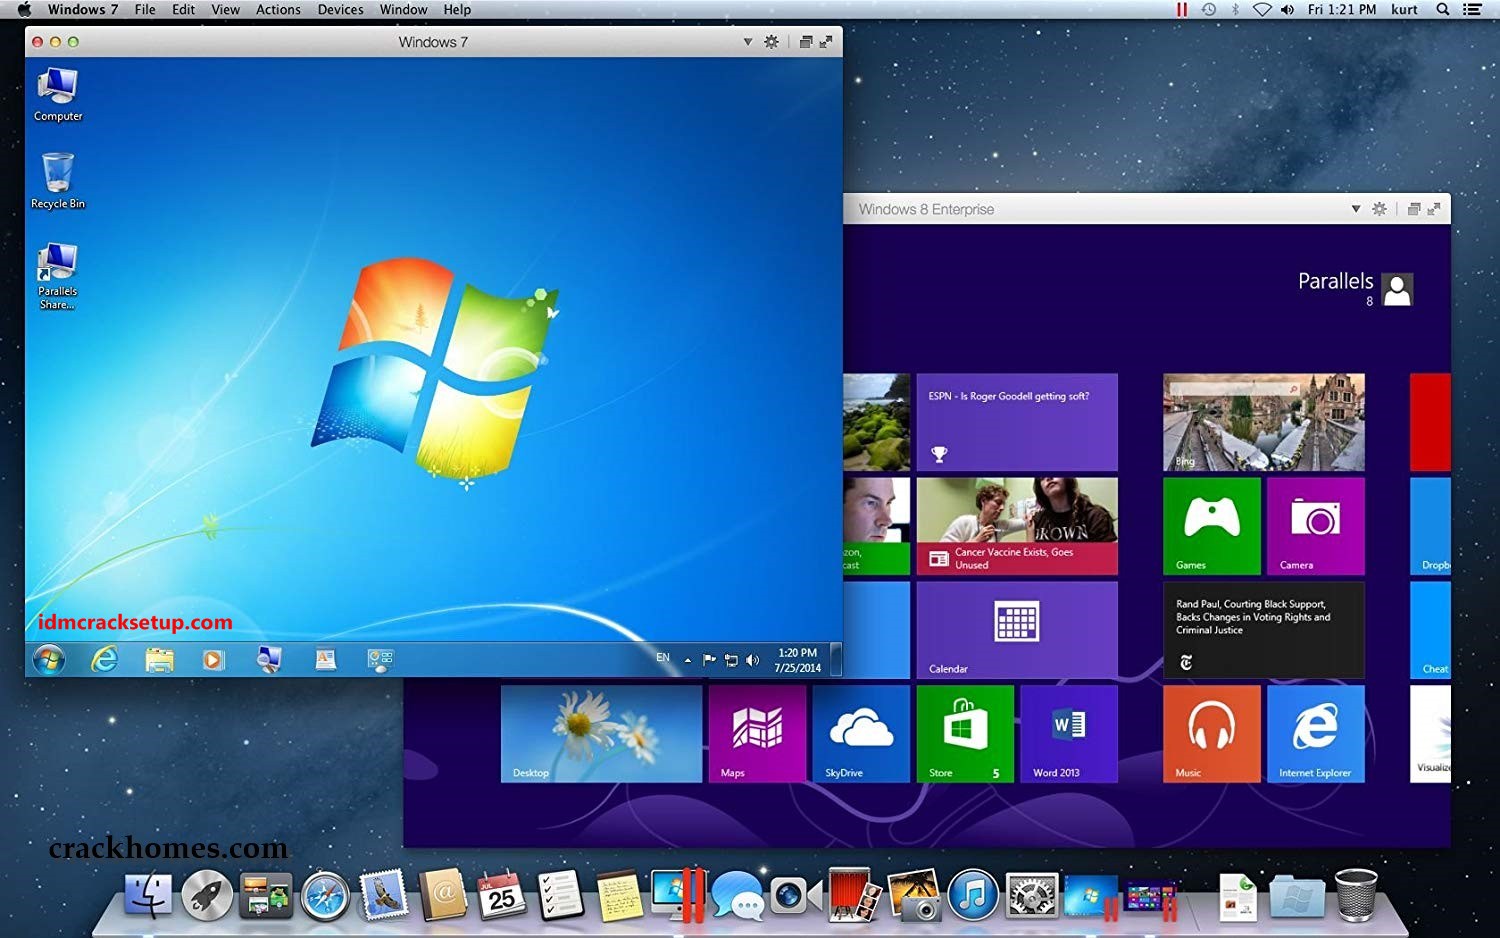 parallels 7 for mac torrent